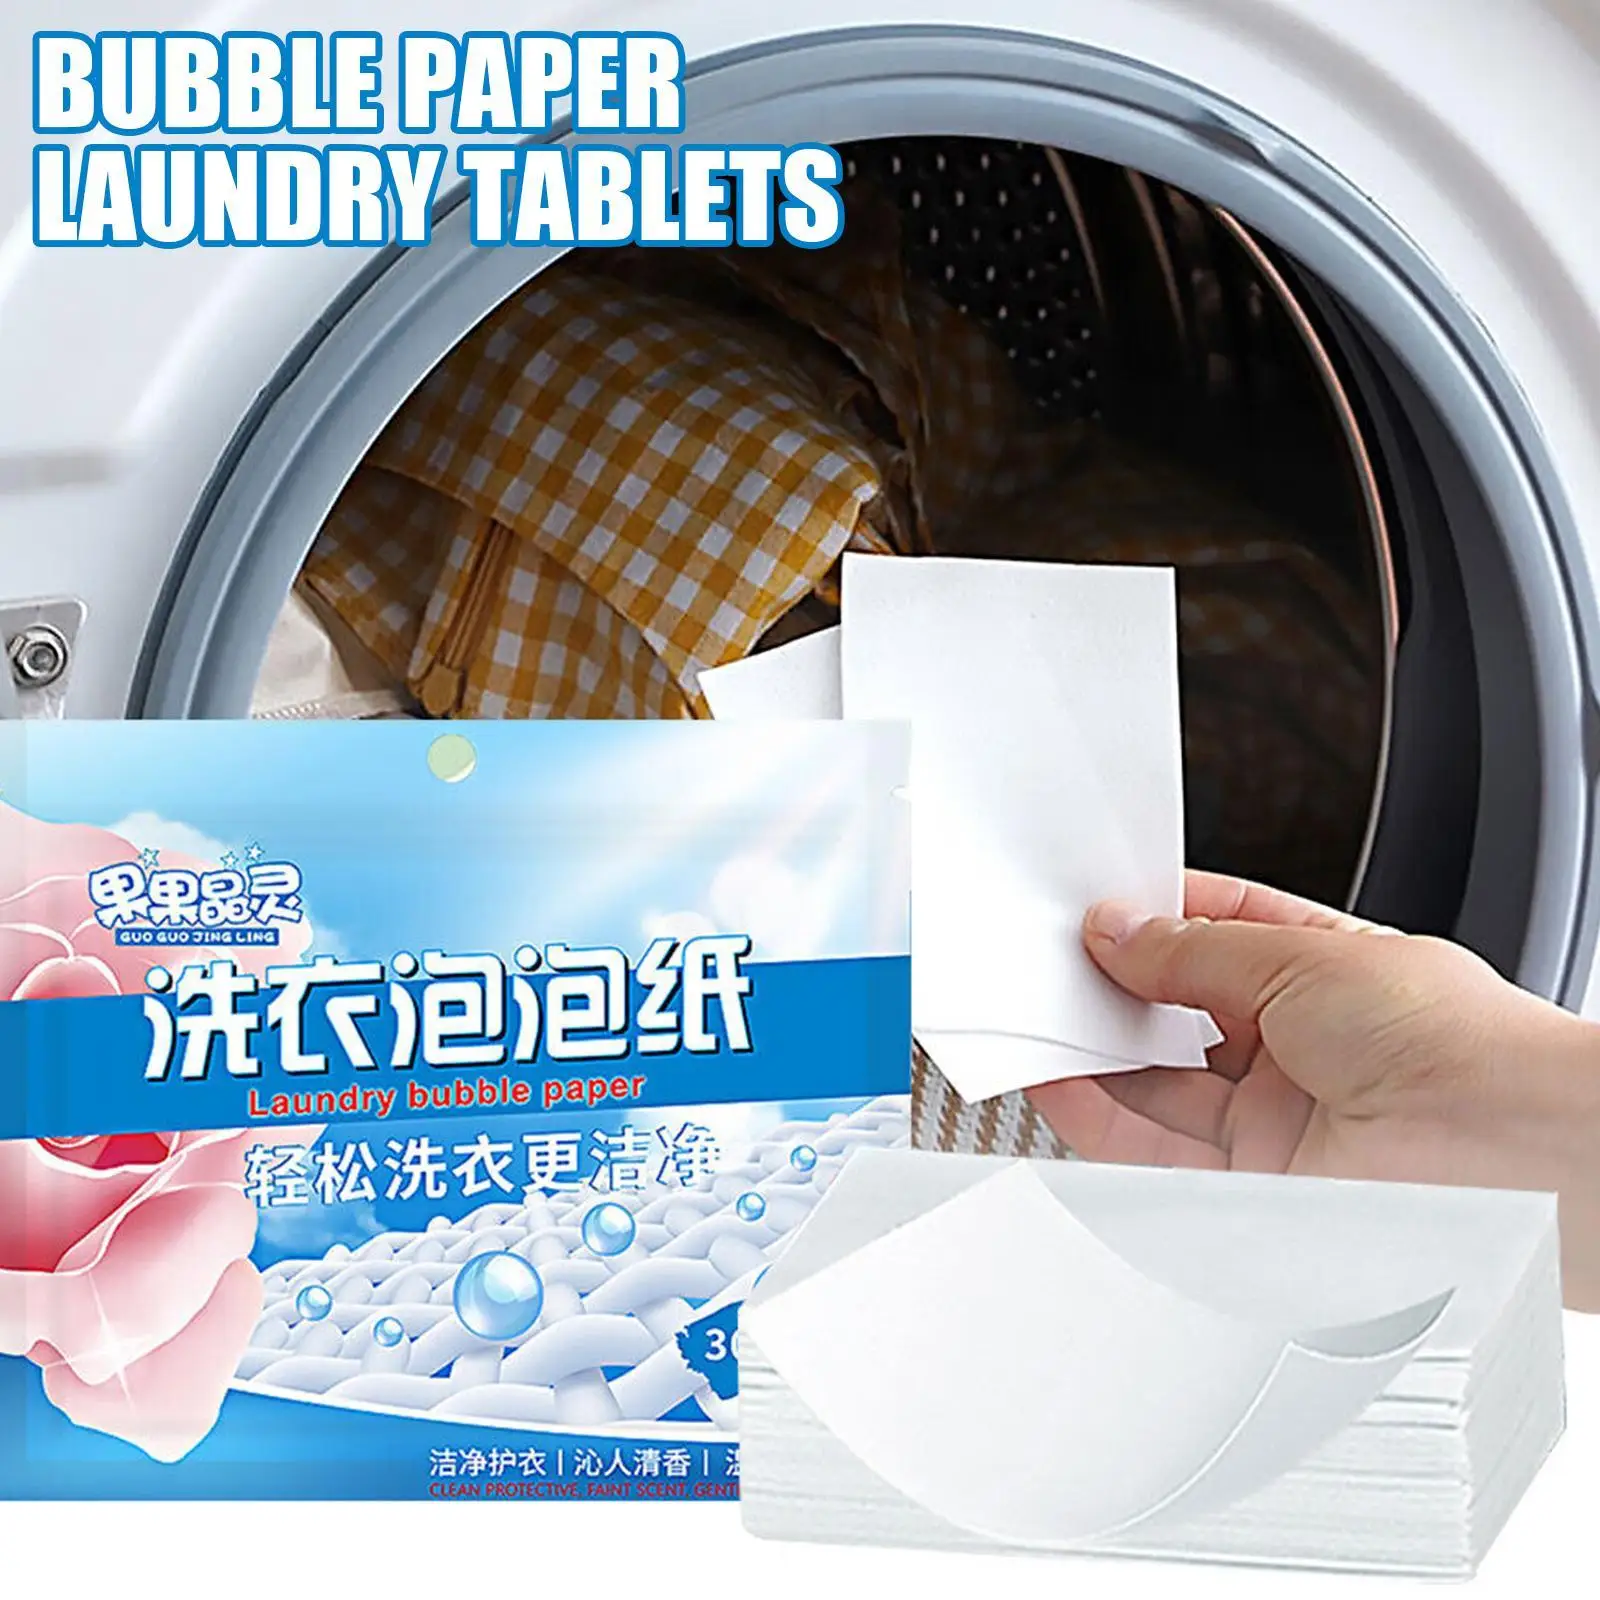 

30pcs Laundry Detergent Sheets Easy Dissolve Laundry Tablets Strong Deep Cleaning Detergent Laundry Soap for Washing Machines